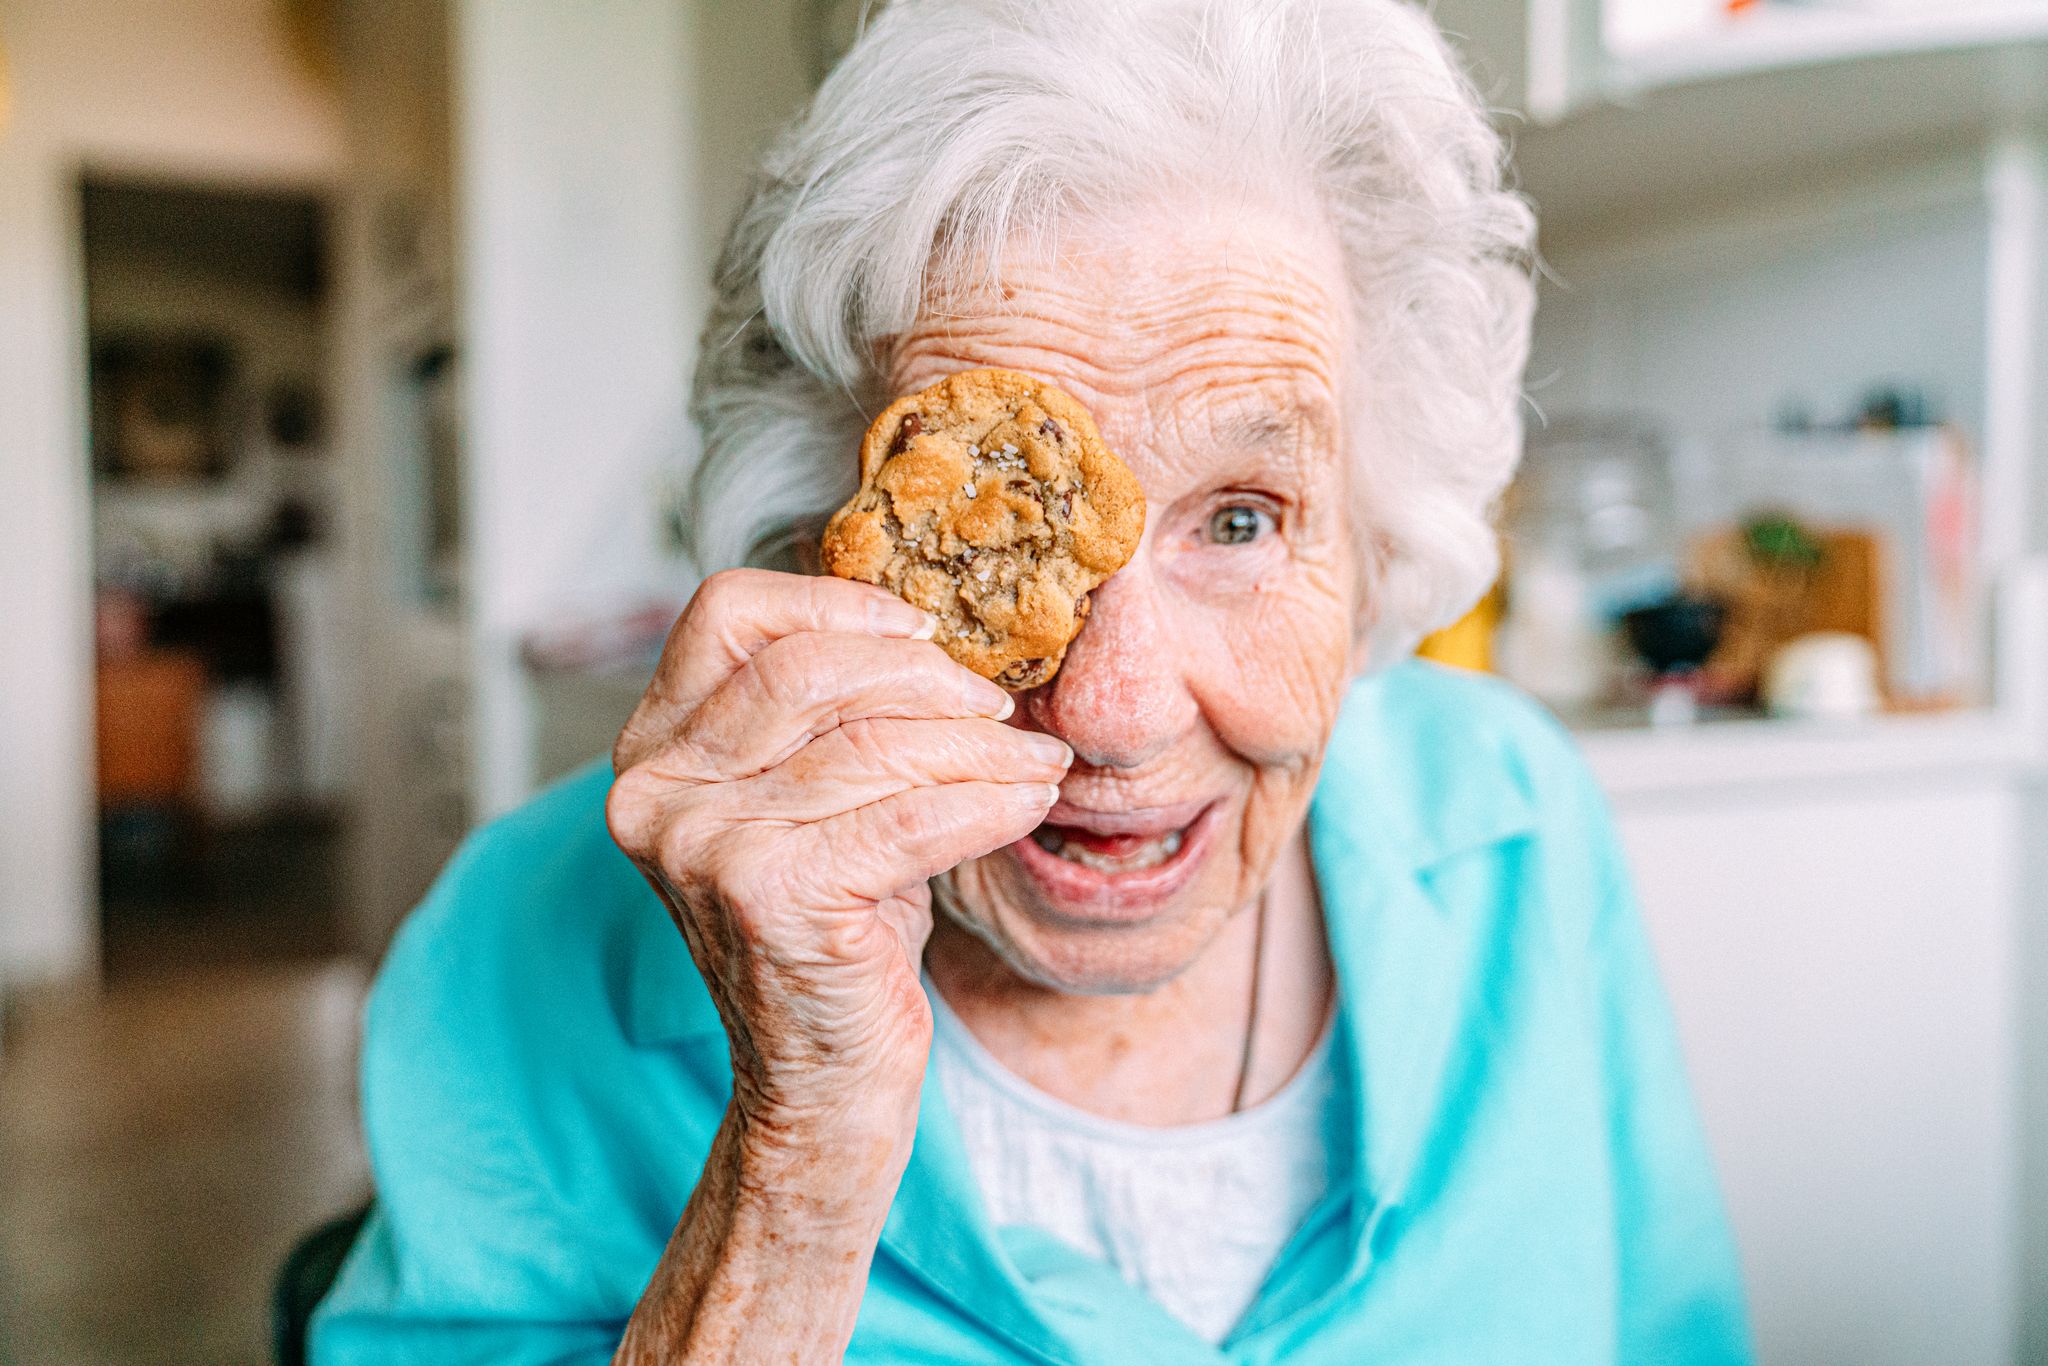 A grandmother holding a cookie. | Source: Getty Images